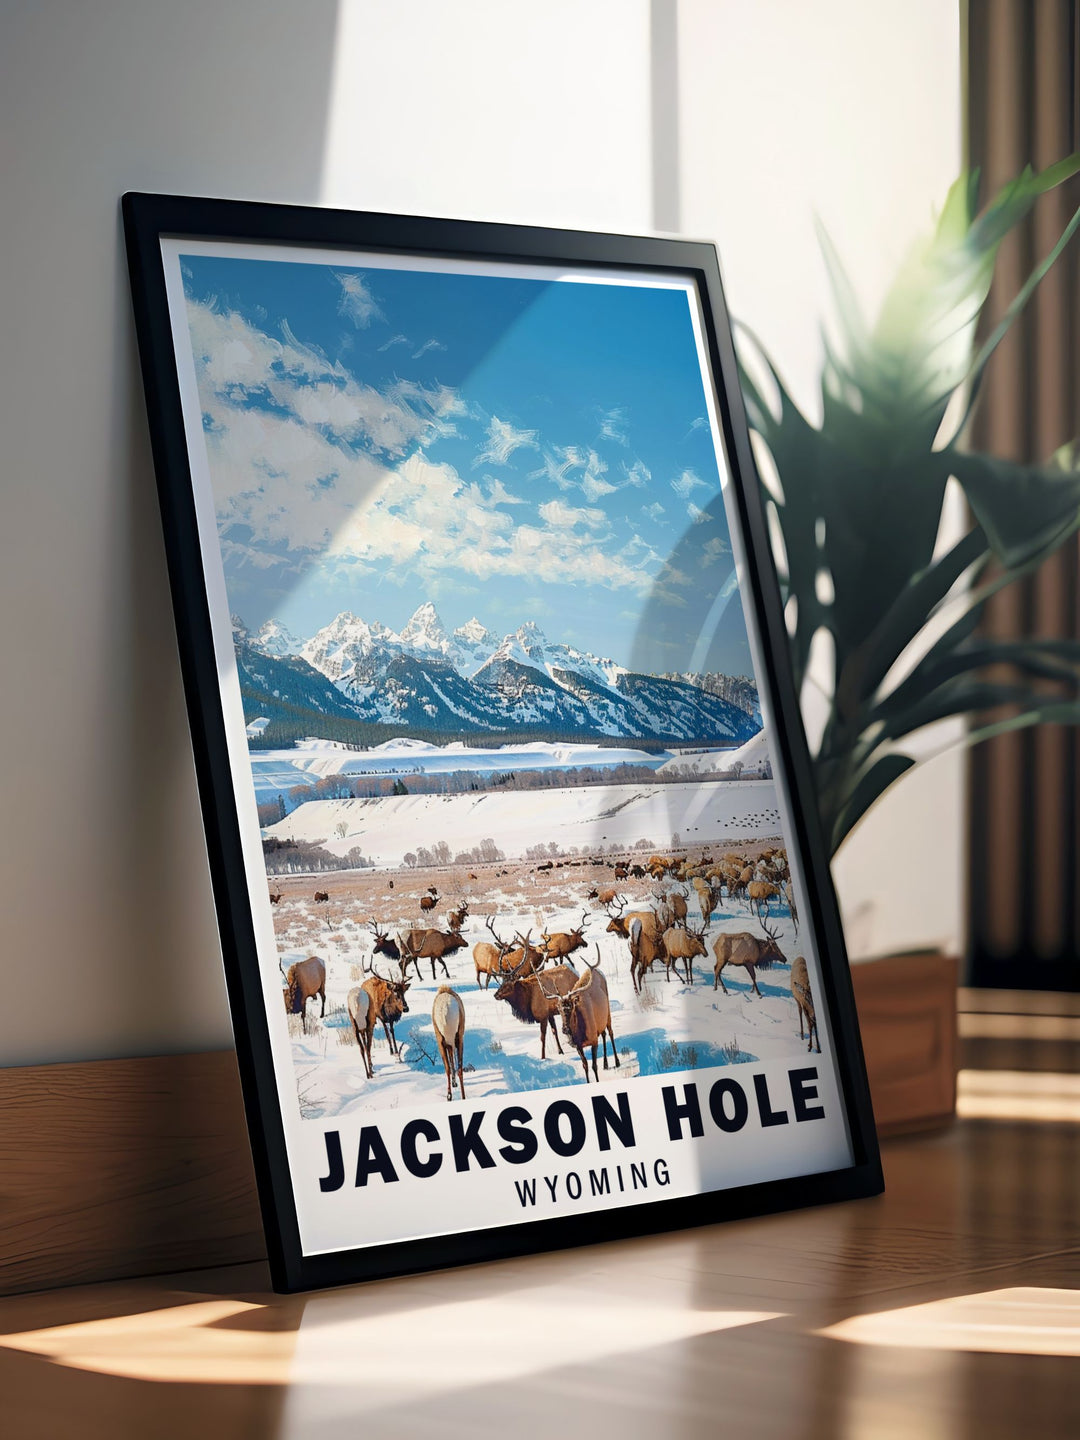 Highlighting the rugged peaks of Jackson Hole and the serene refuge of the elk, this travel poster brings the essence of Wyomings wilderness into your living space.